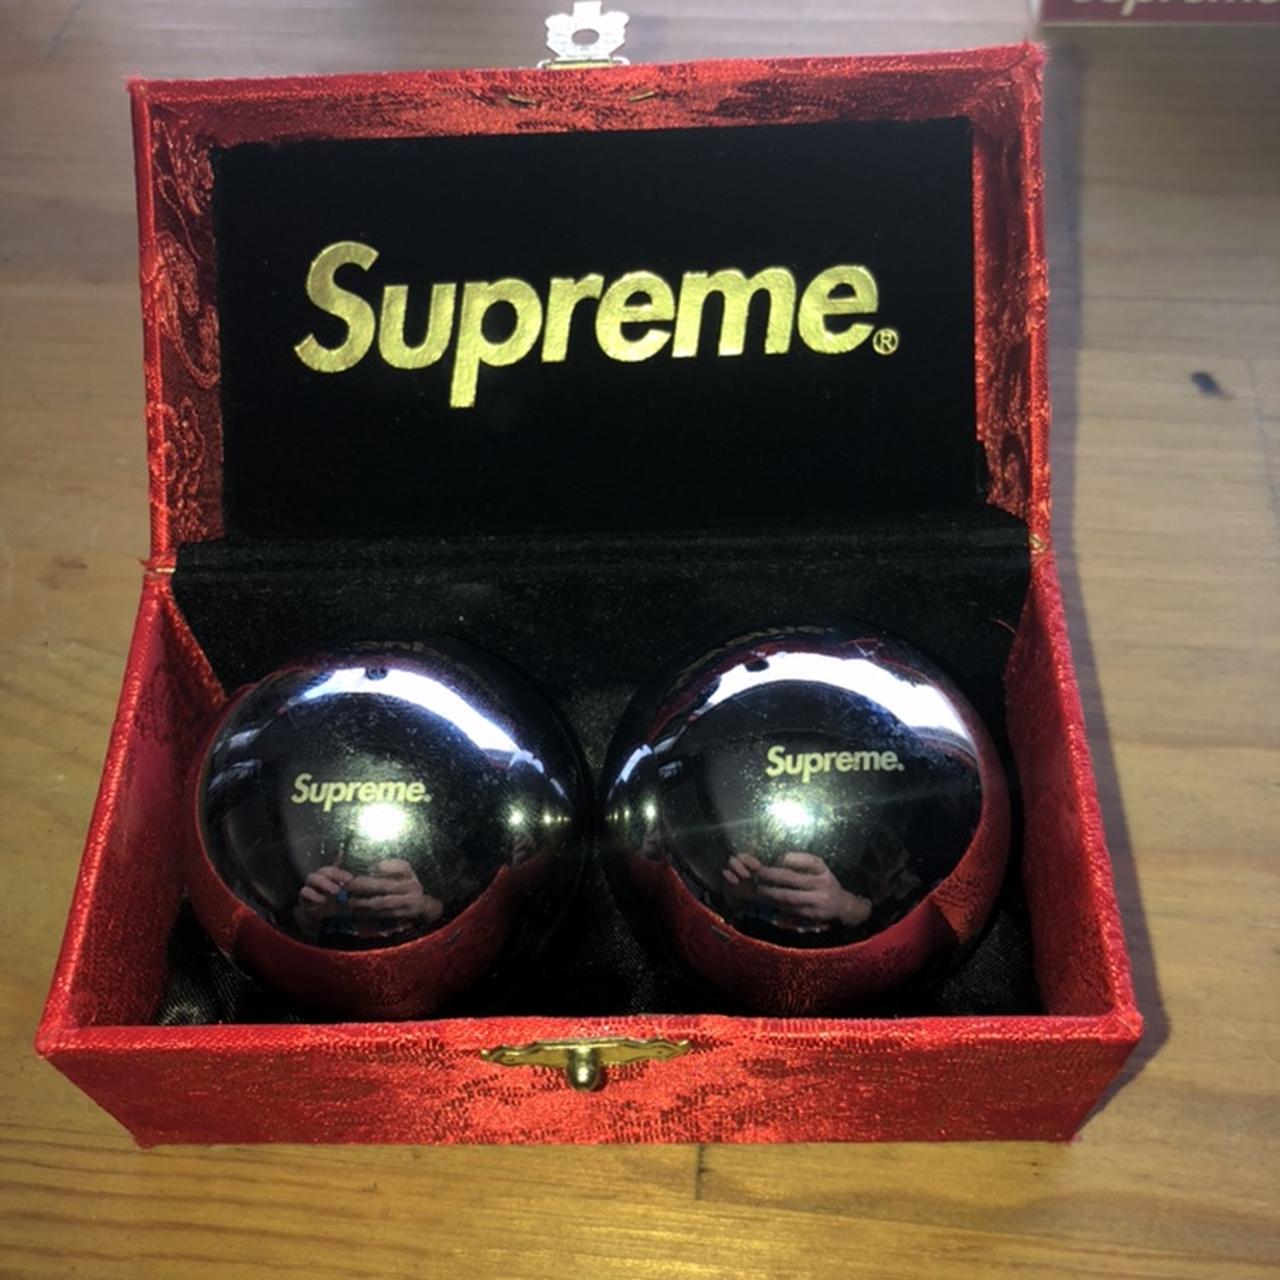 Supreme baoding balls. Very rare and obscure... Depop